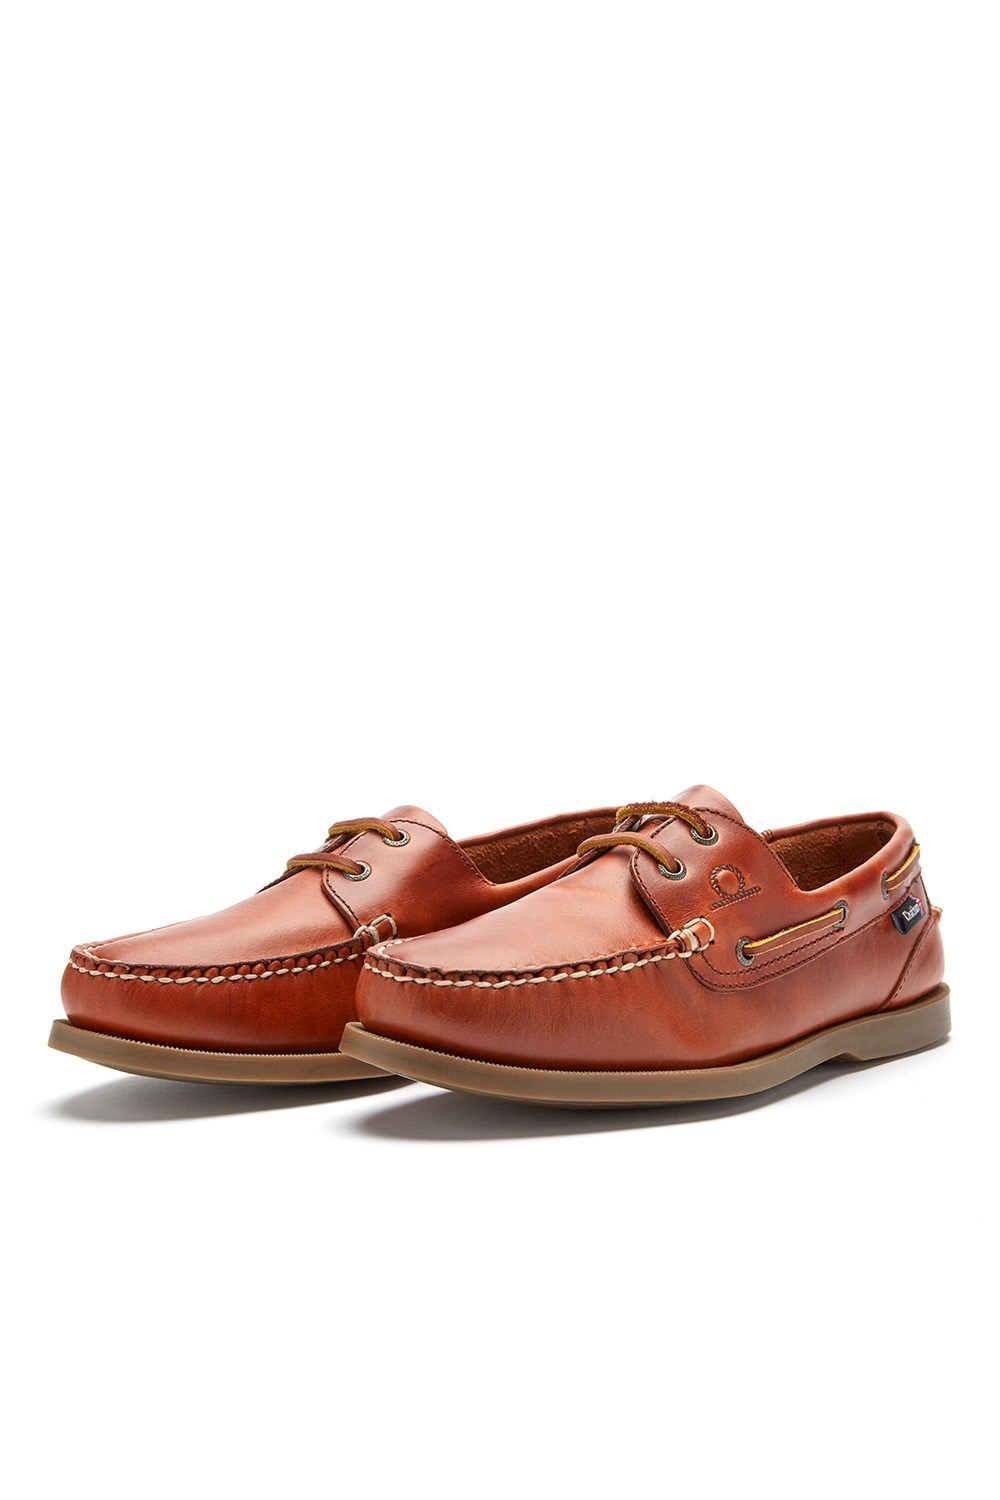 The Deck Ii G2 Mens Premium Leather Boat Shoes -